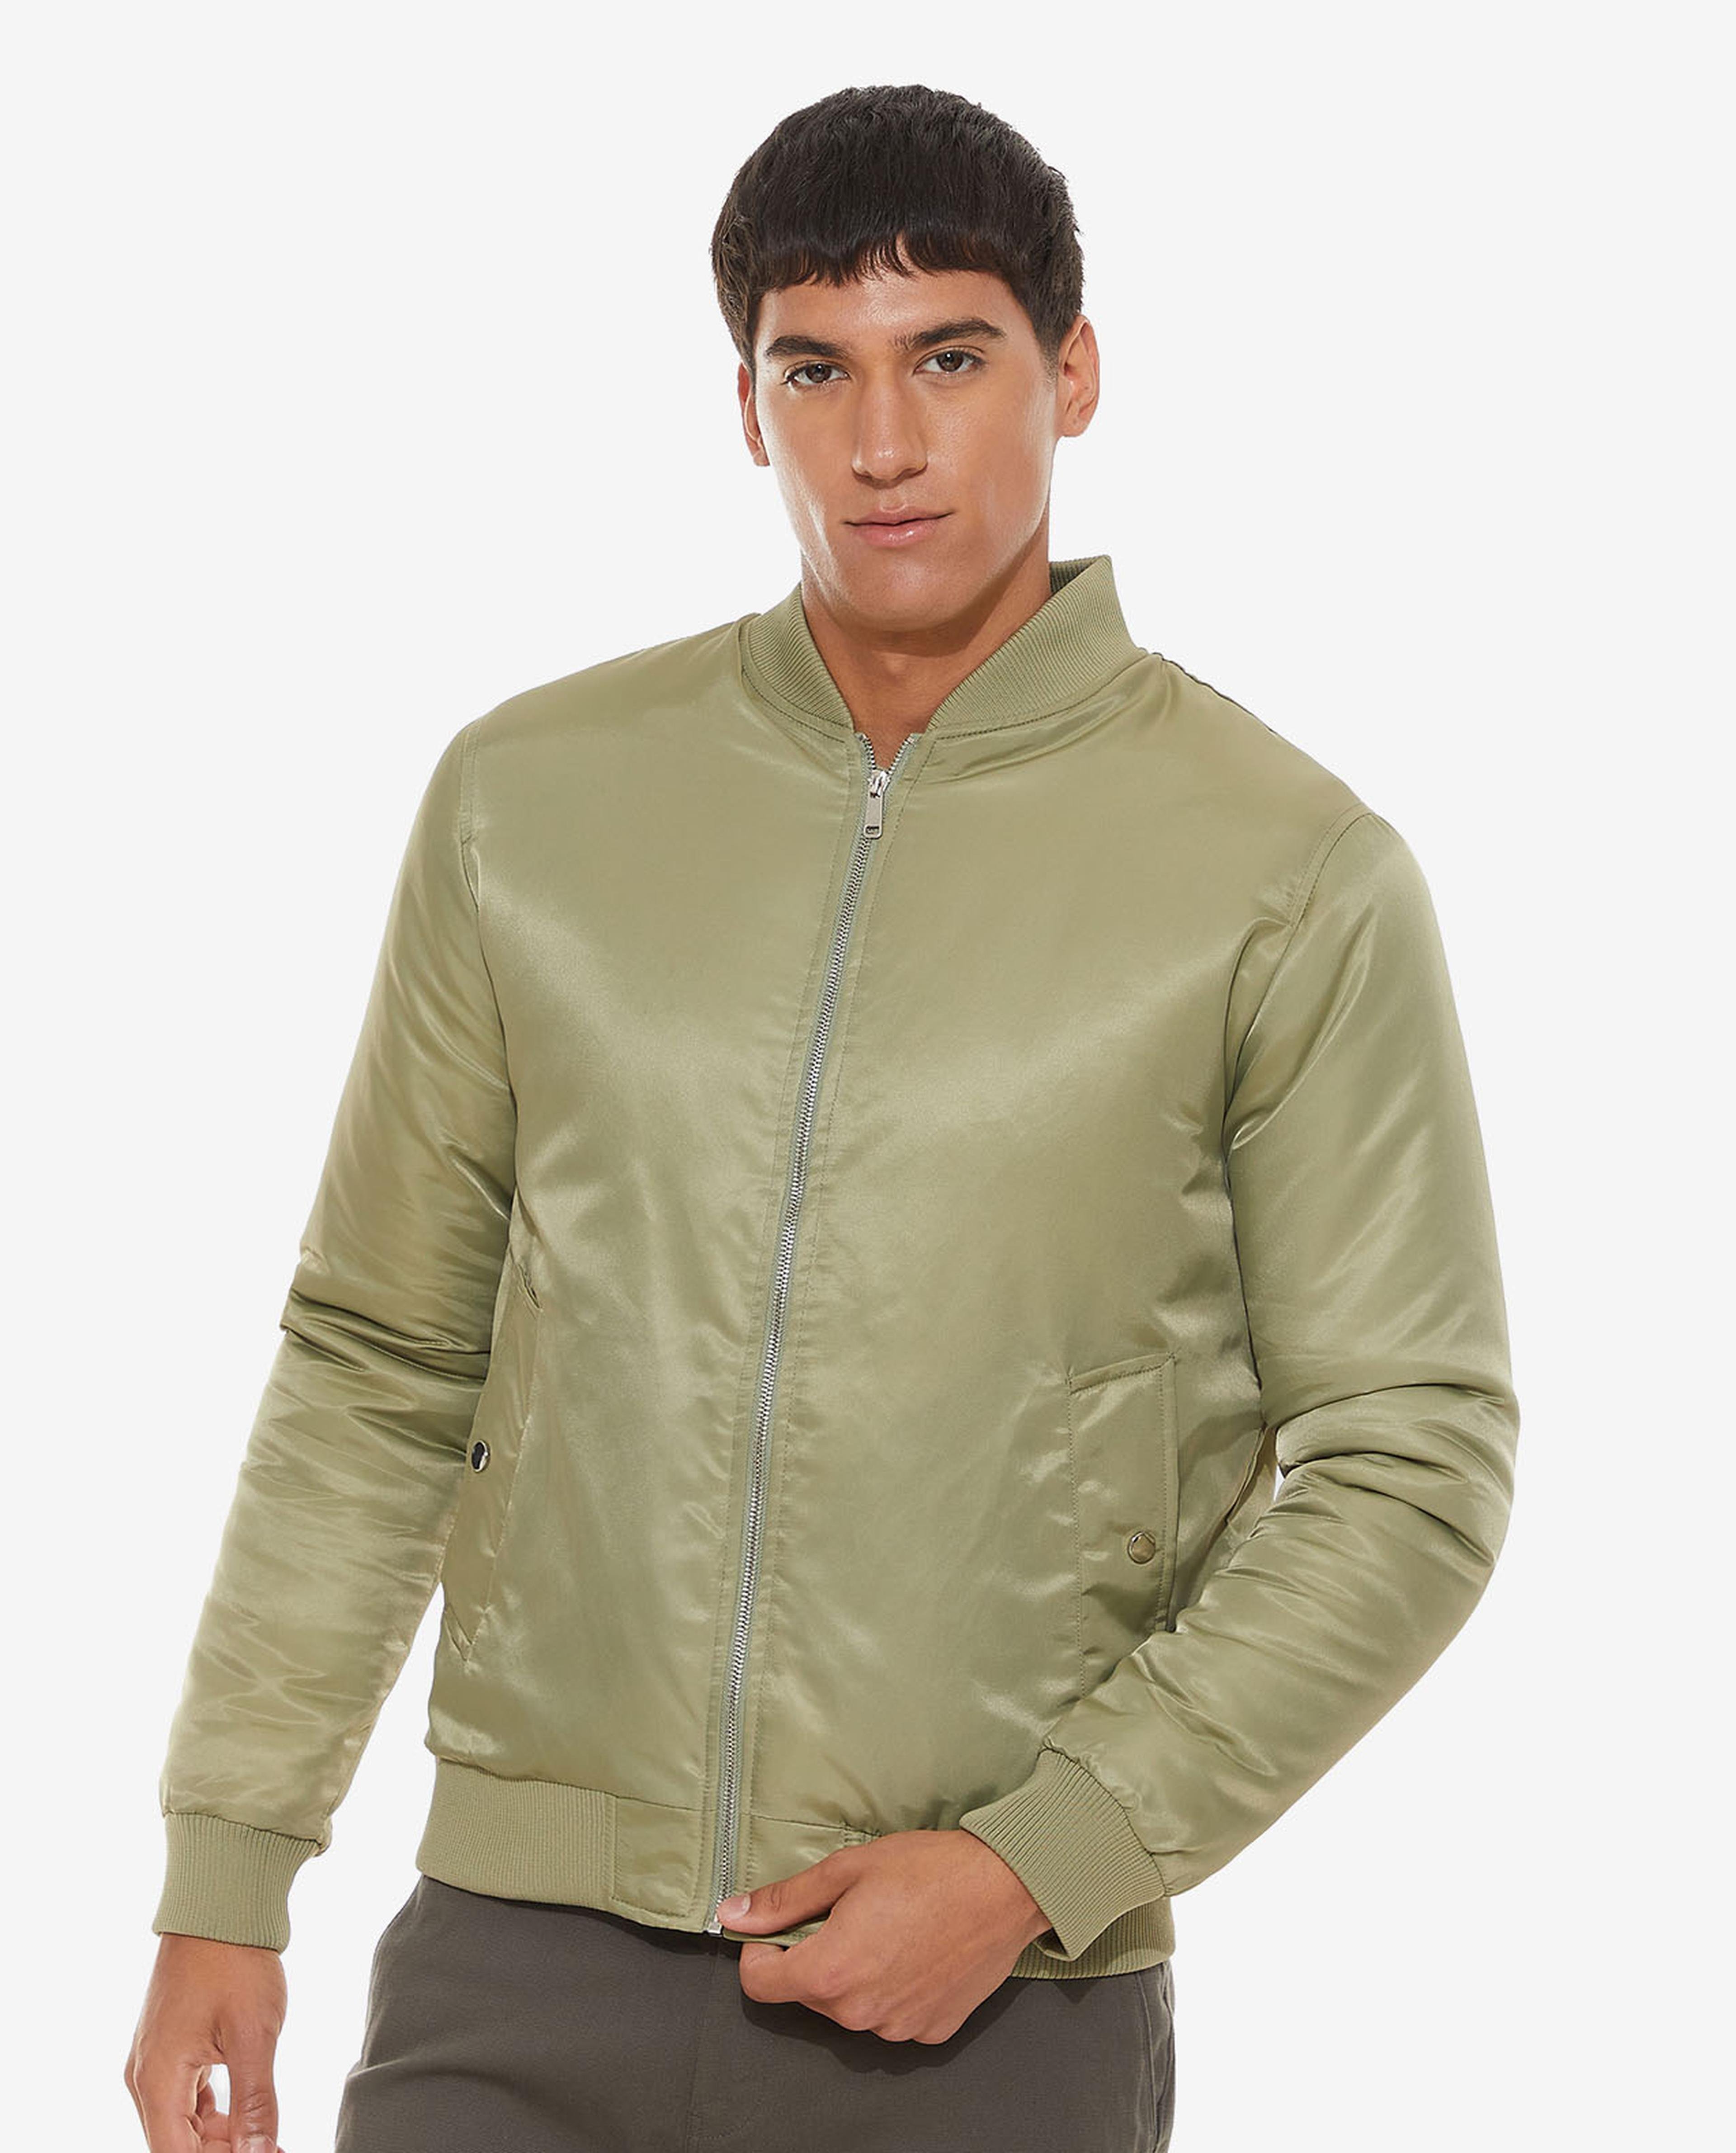 Solid Bomber Jacket with Zippered Closure